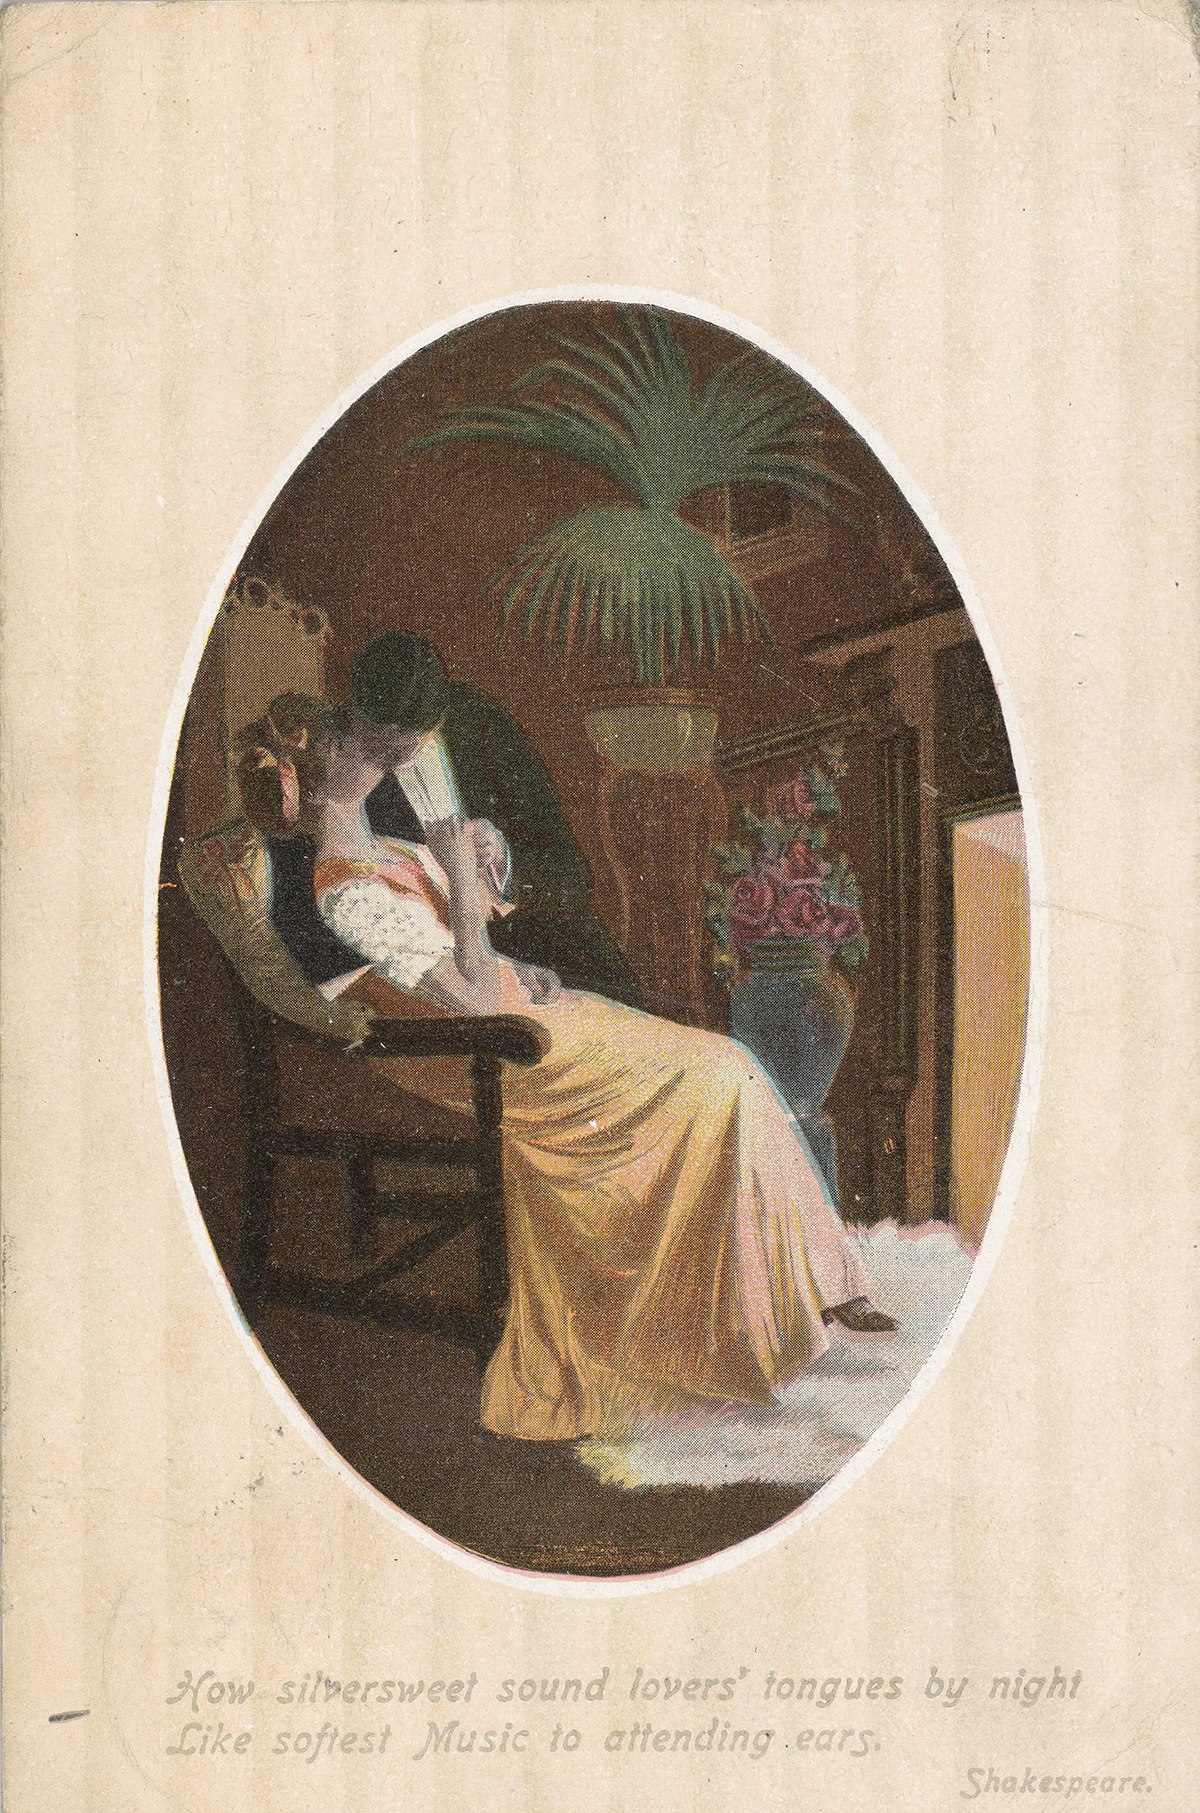 Postcard of a couple kissing with a Shakespeare quote.